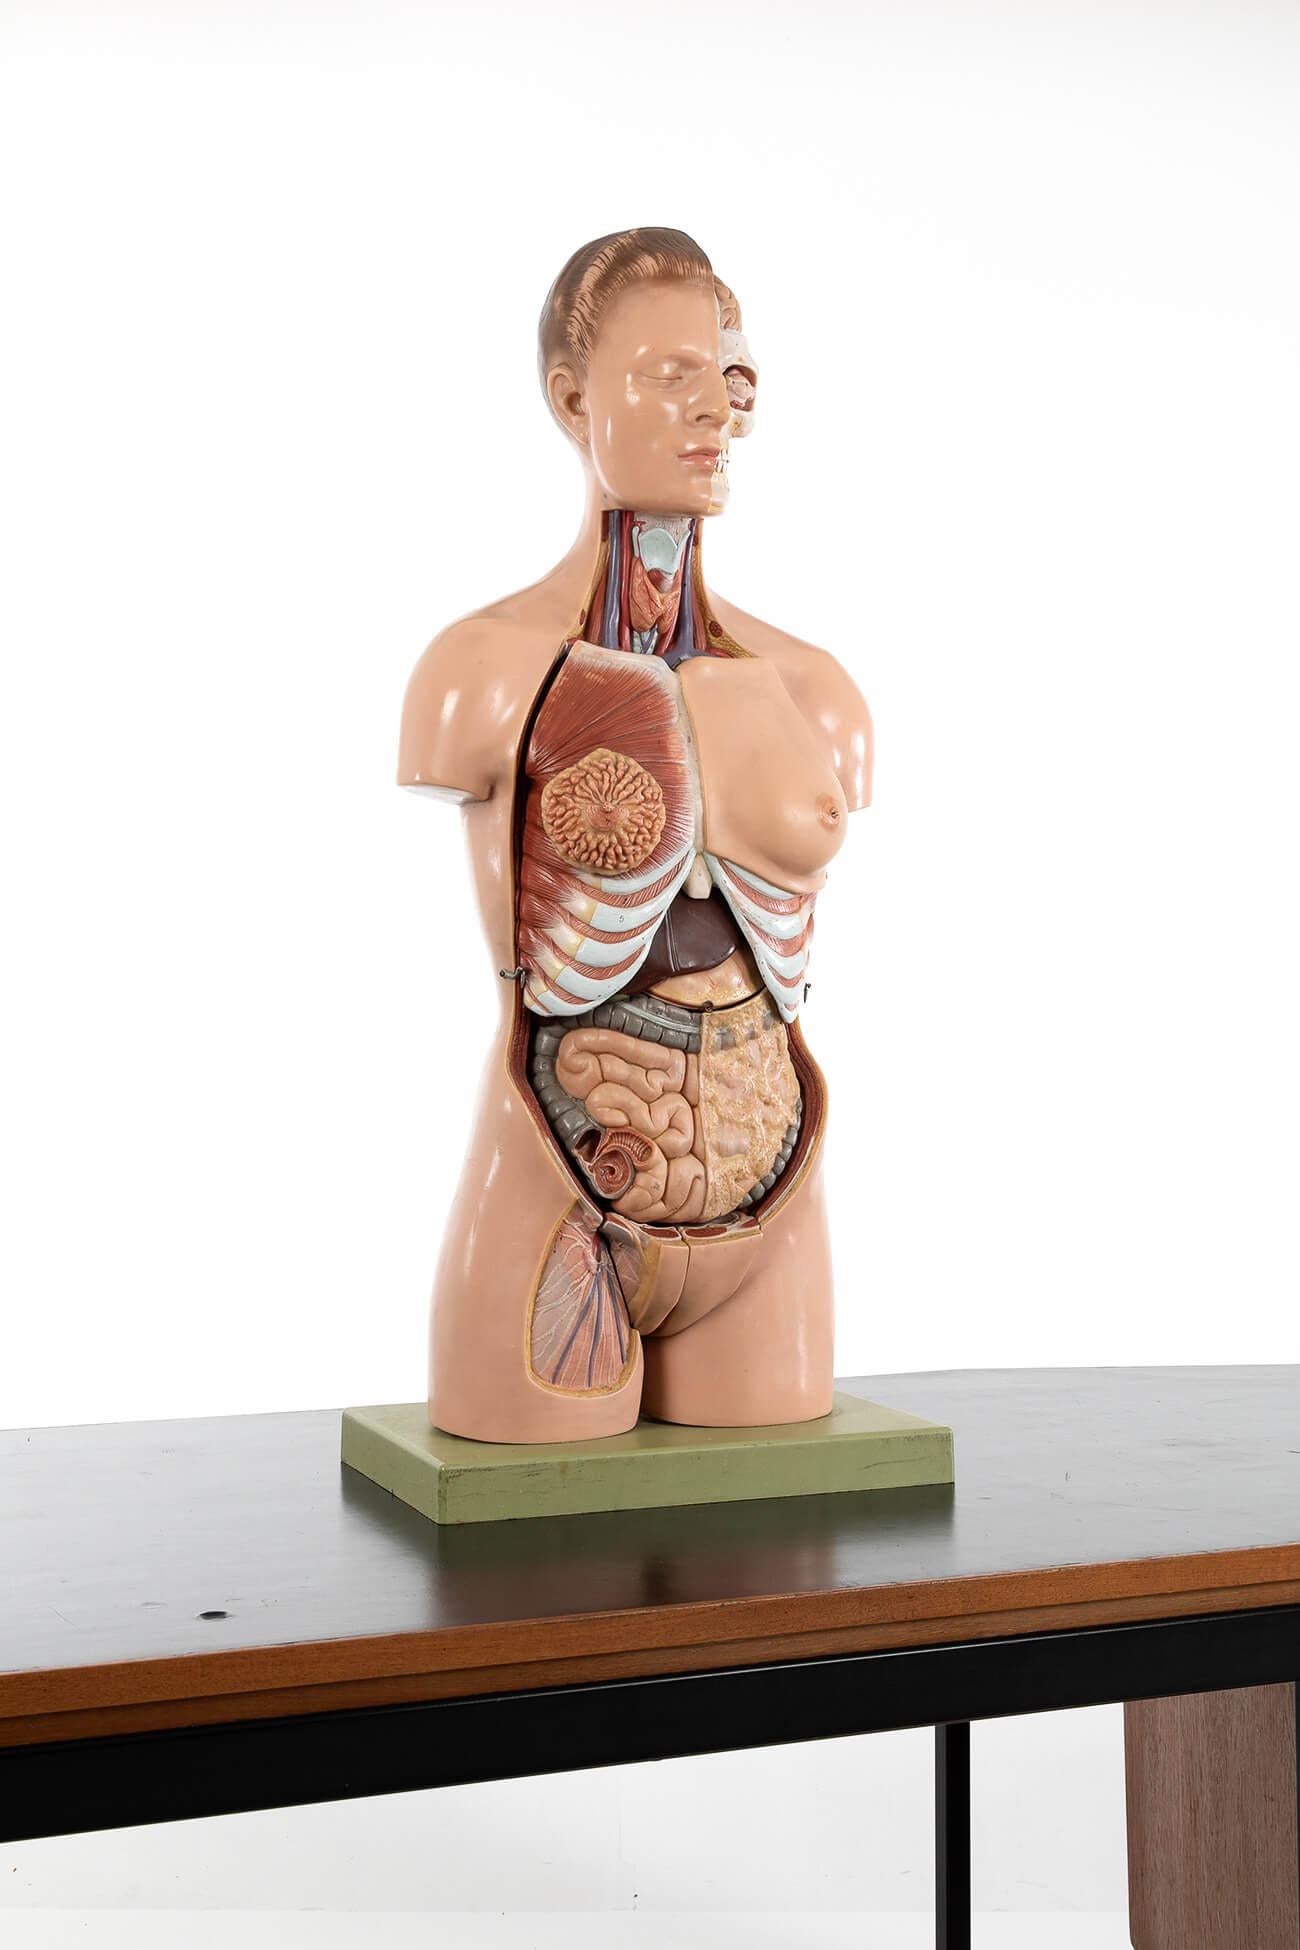 A remarkably detailed model of a female torso from the German manufacturer SOMSO.

The nineteen removal organs are made from Somsoplast and this model is number AS4 in the series produced by the company.

The organs included are the eye with optic